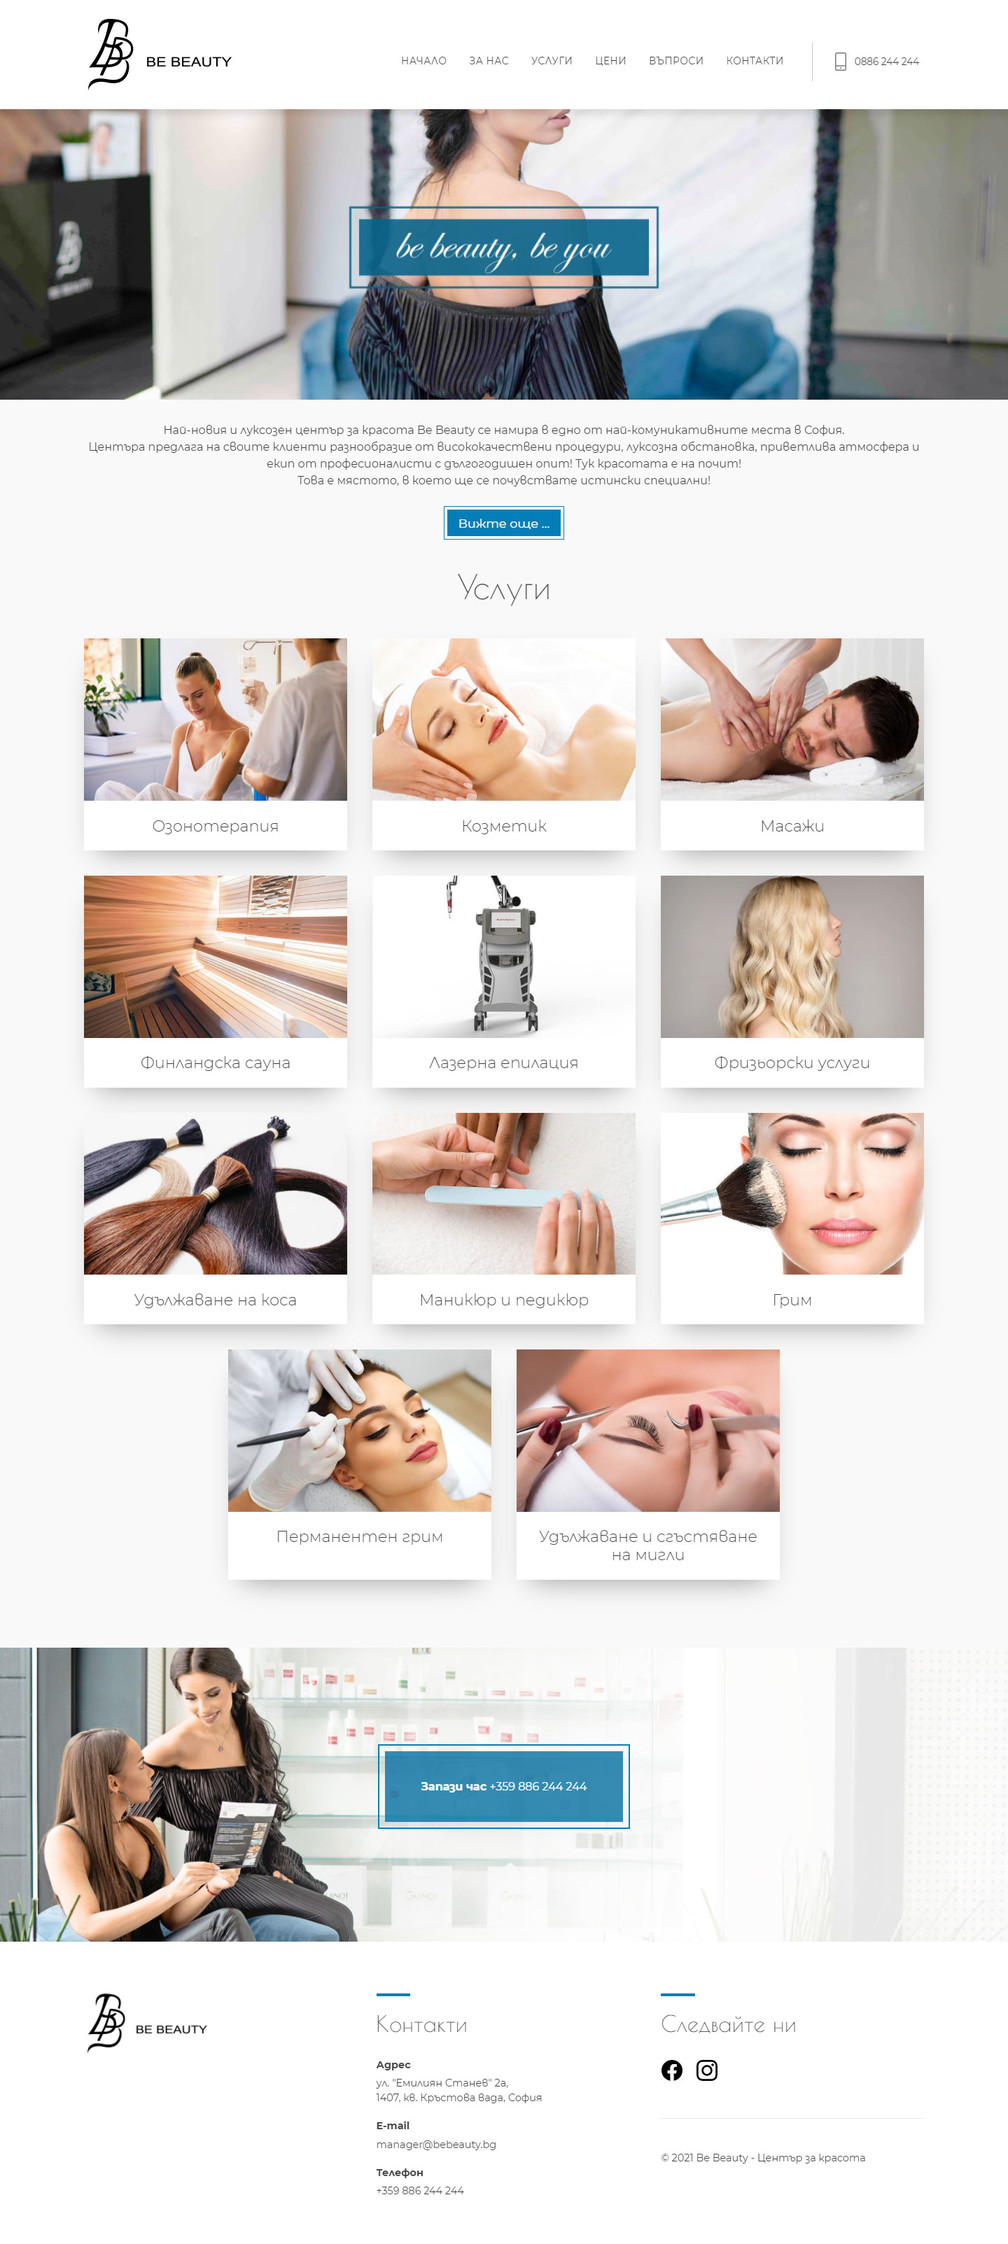 Design and Website development of Be Beauty